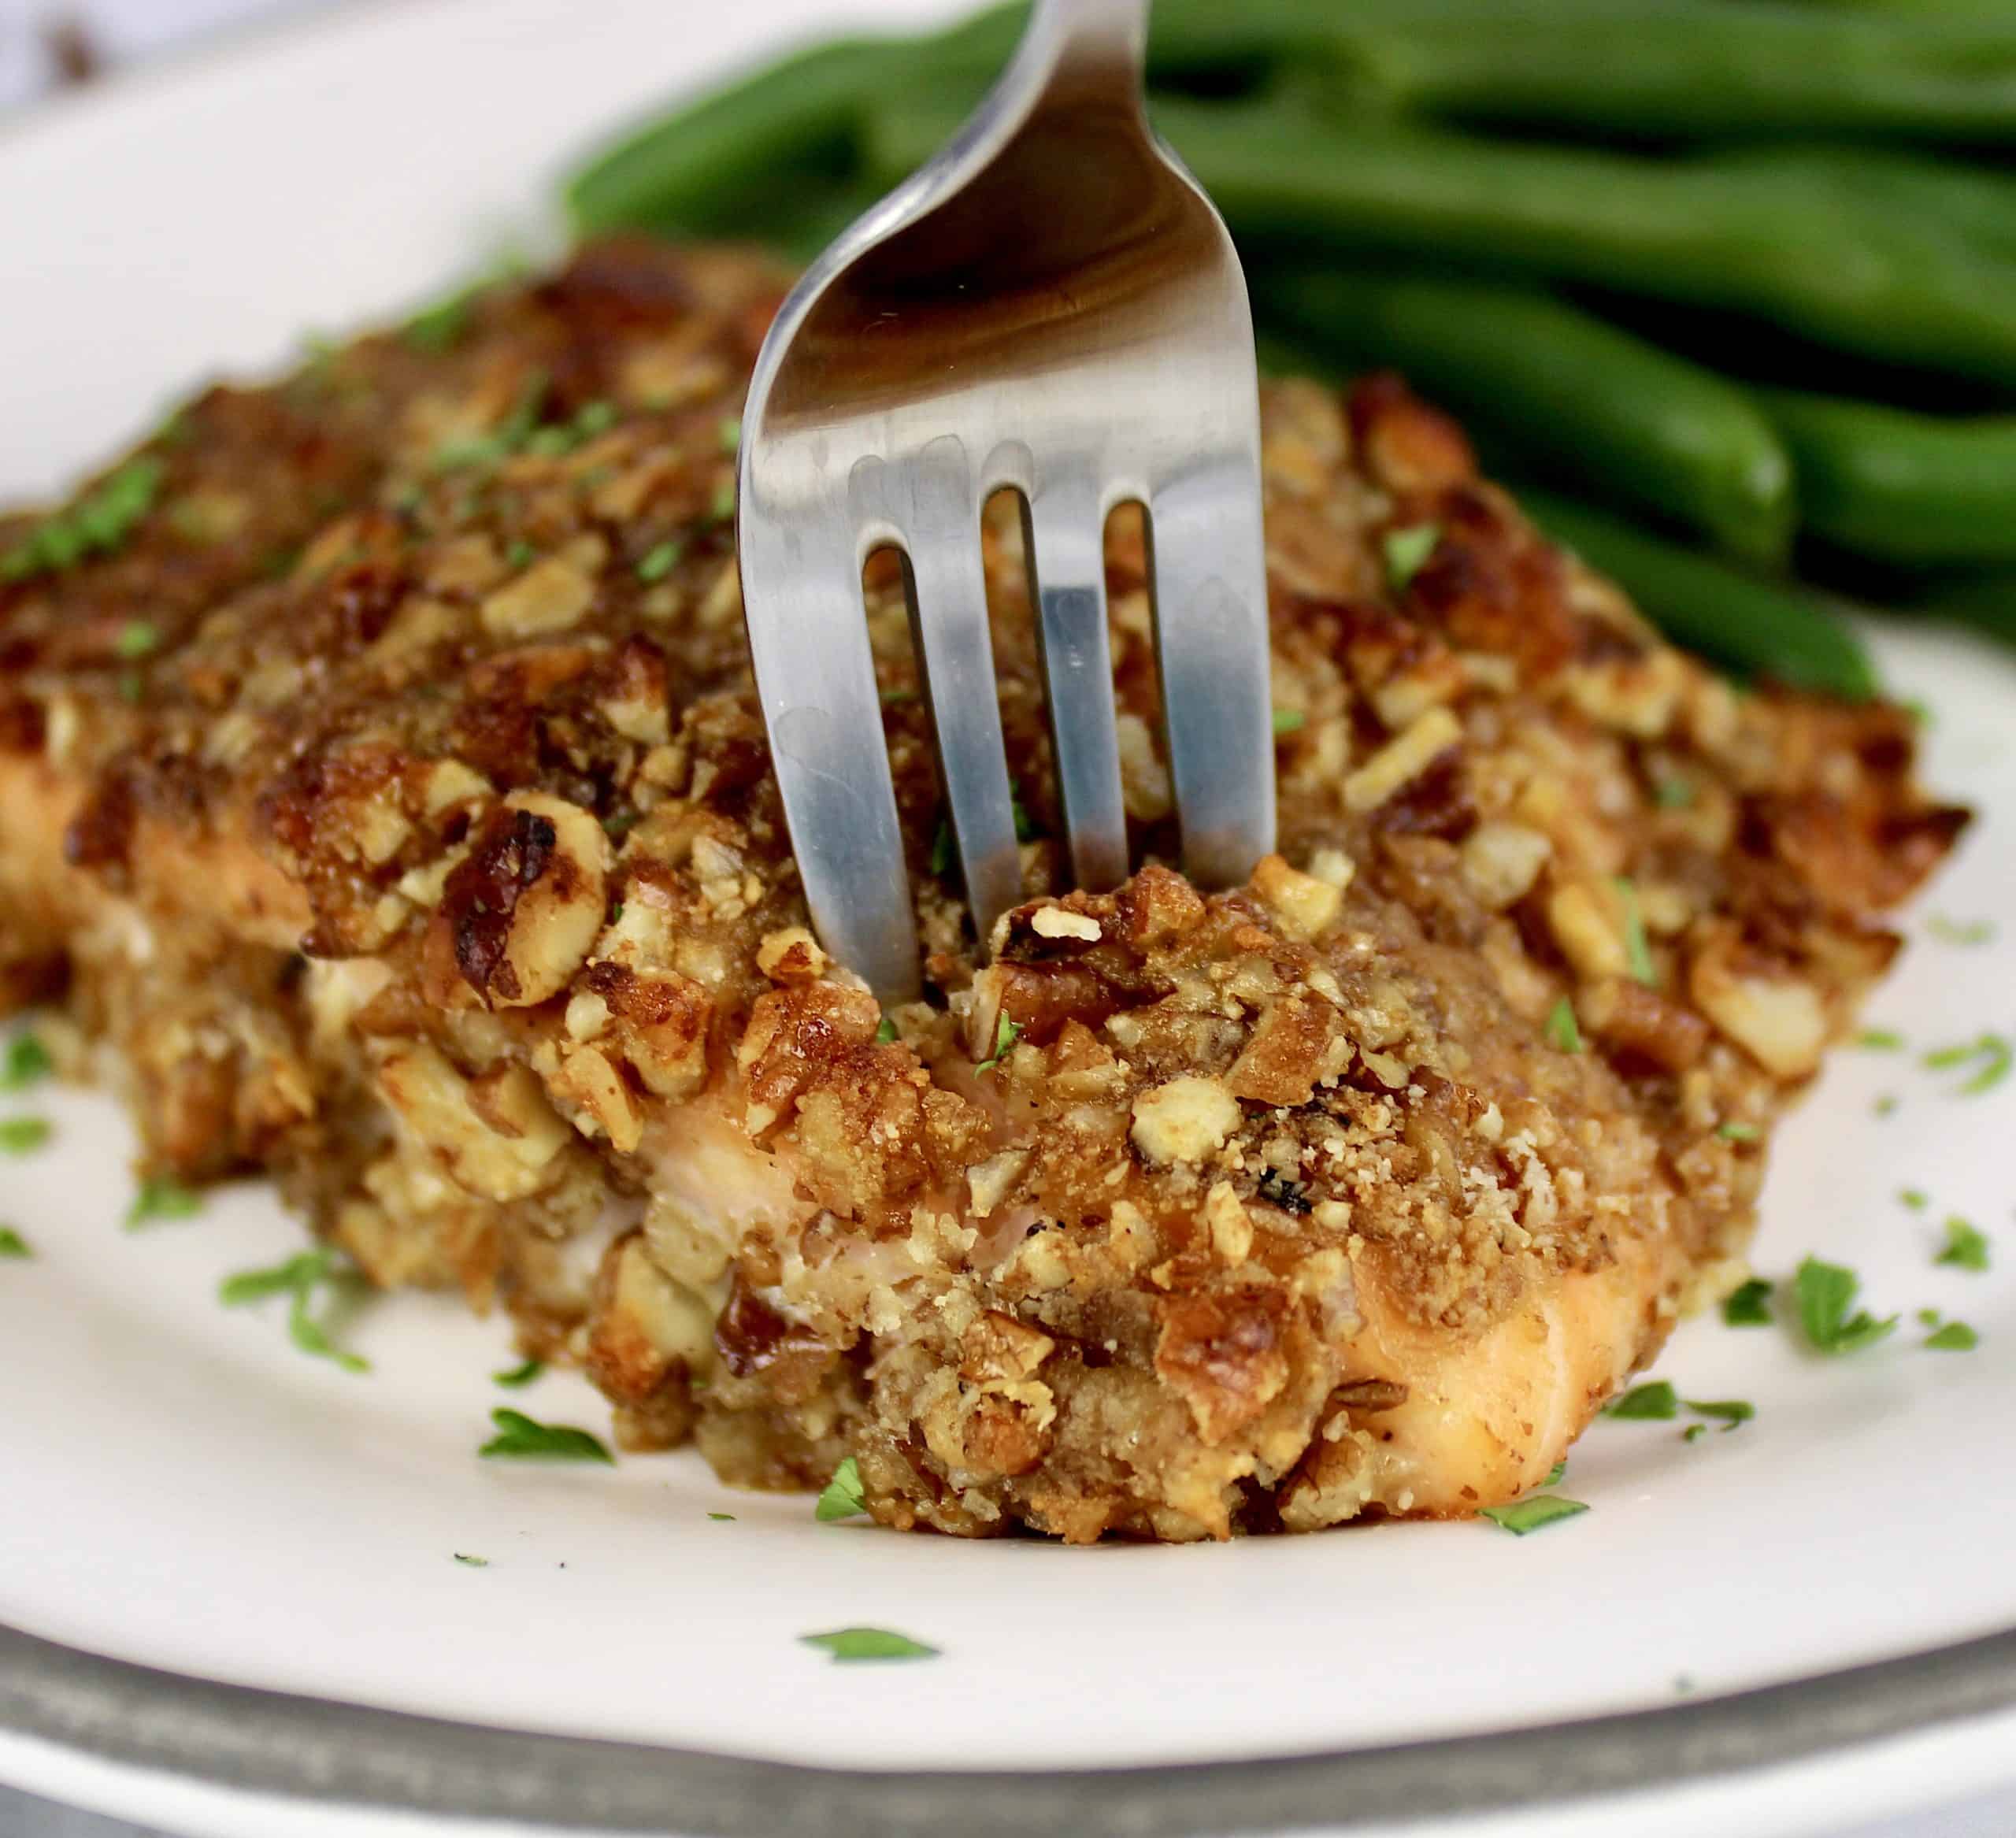 Pecan Crusted Salmon with fork digging in